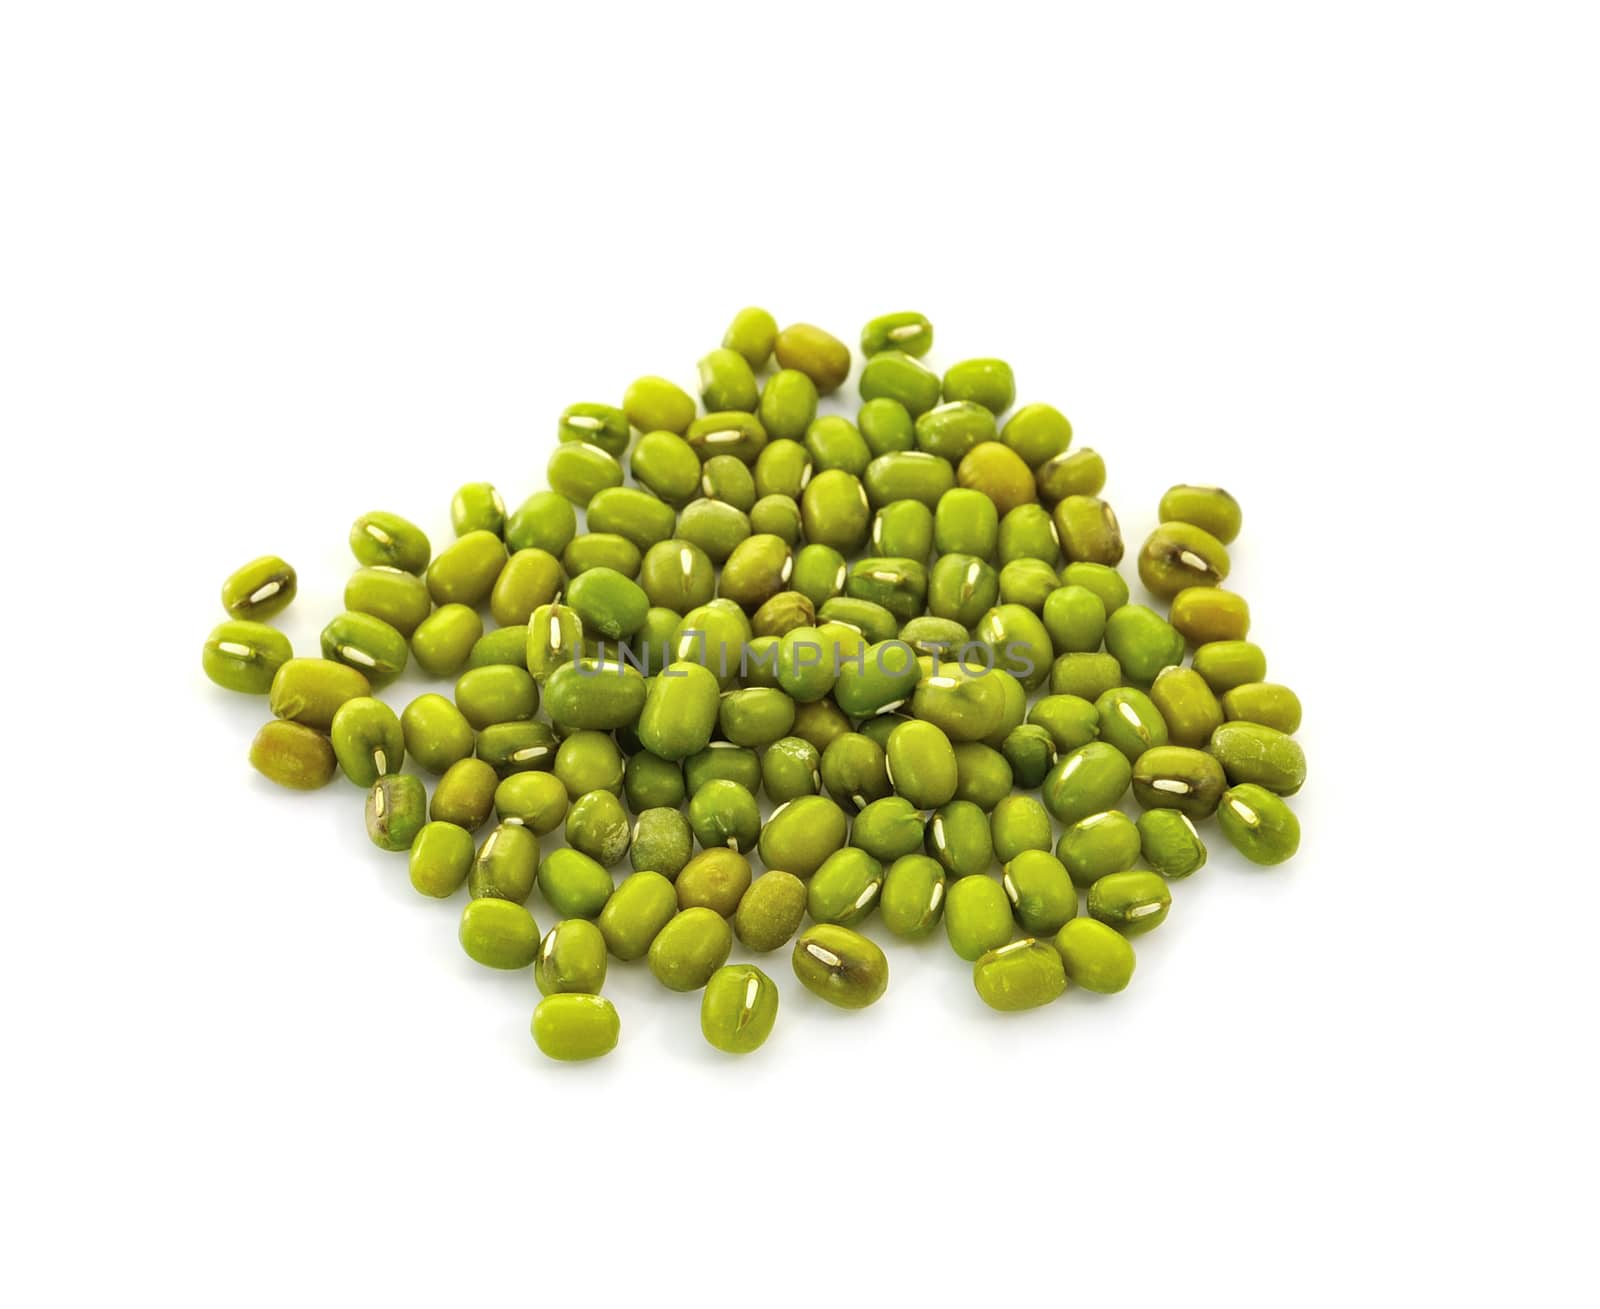 green peas isolated on a white background by sommai